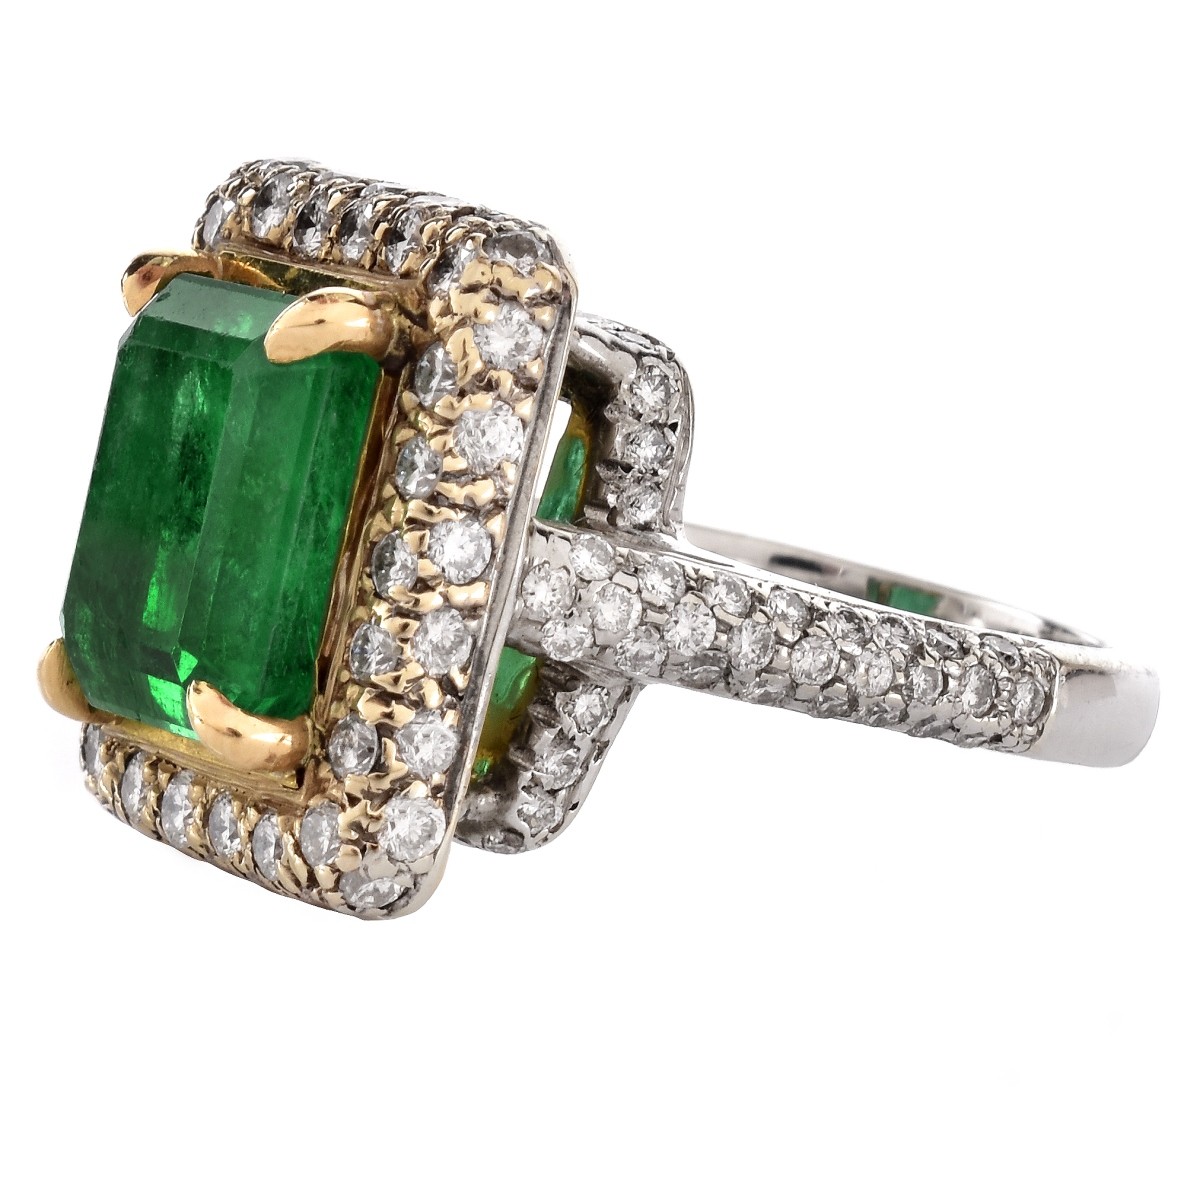 GIA 5.32ct Emerald, Diamond and 14K Gold Ring